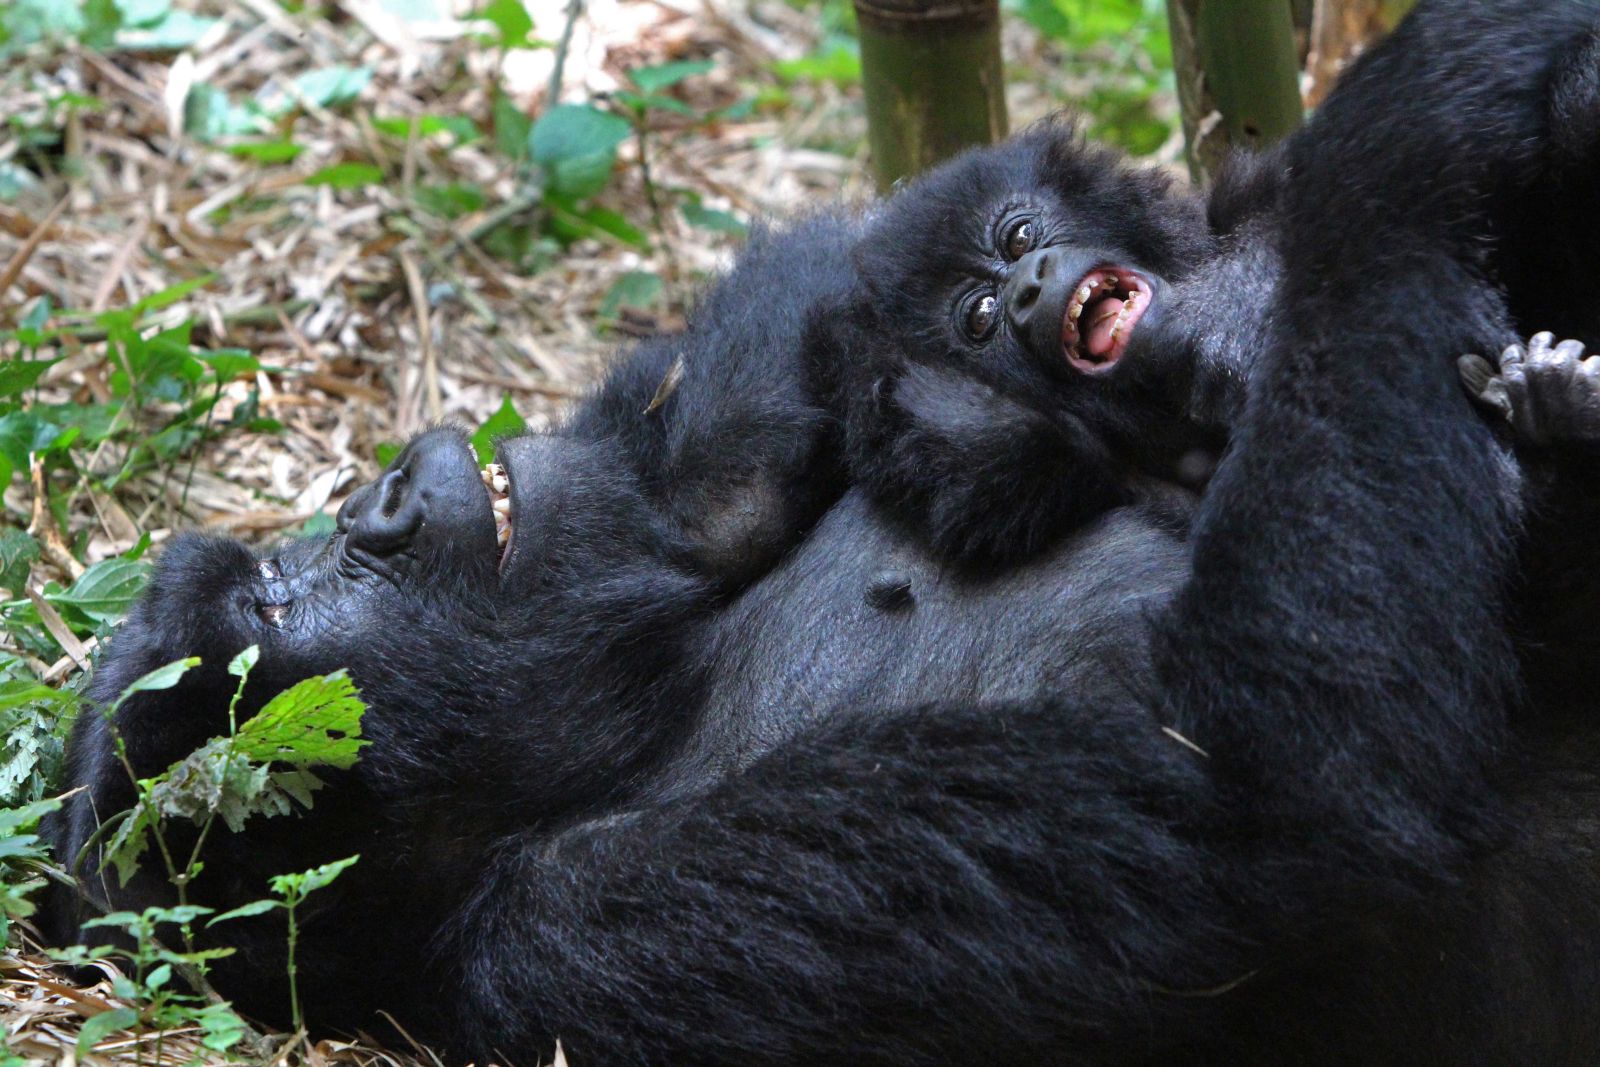 A mountain gorilla lying on their back holding a baby on their stomach in Uganda